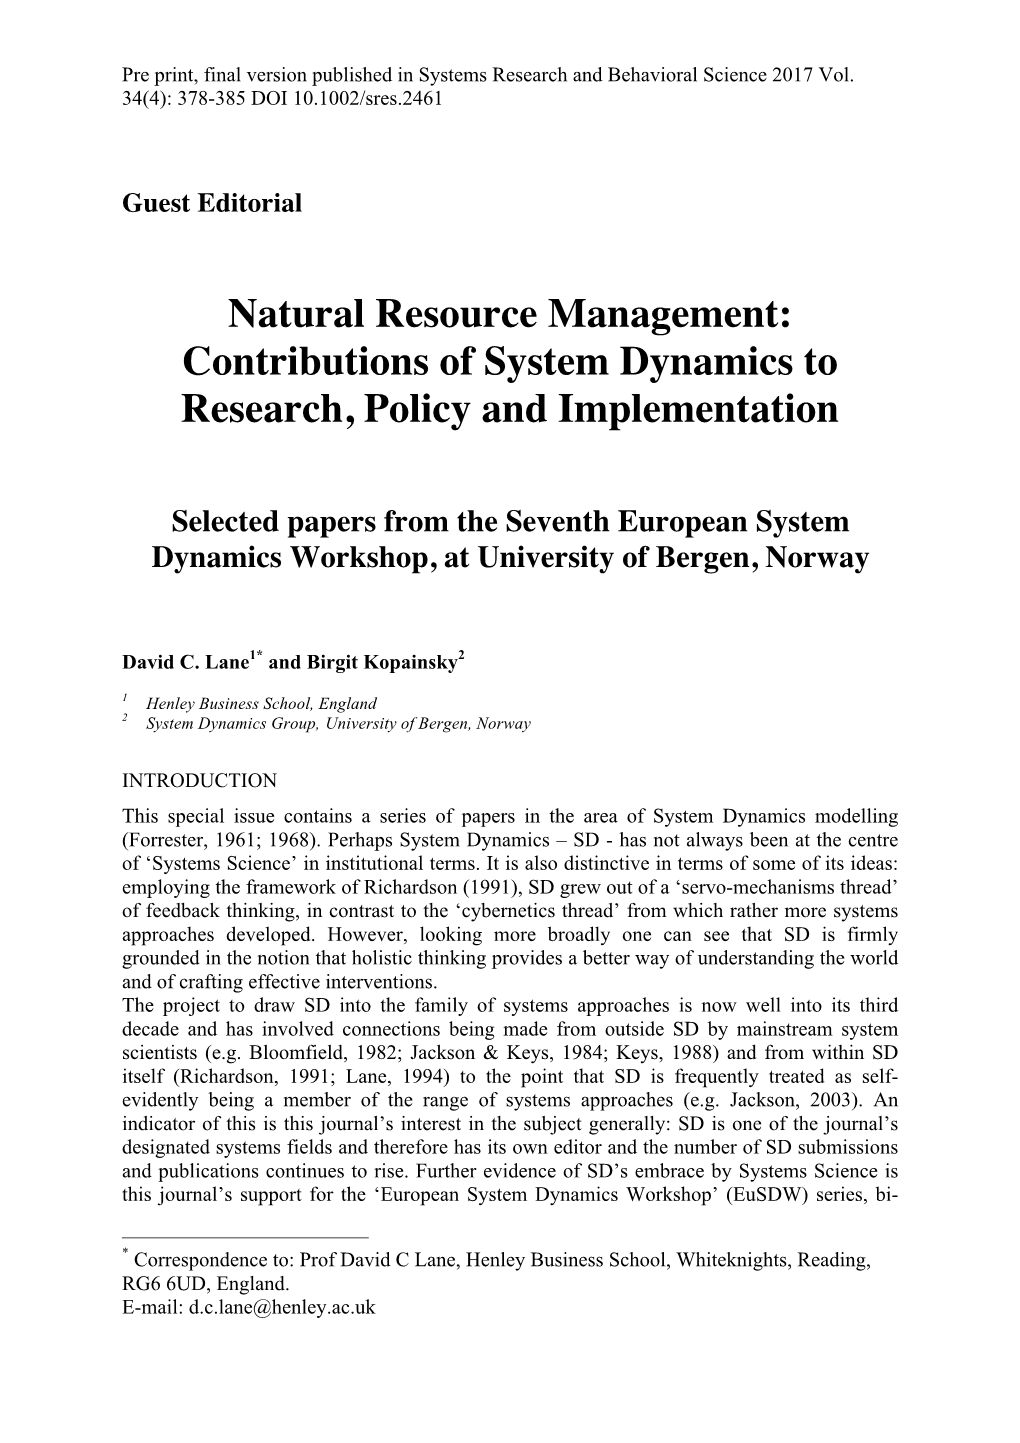 Contributions of System Dynamics to Research, Policy and Implementation